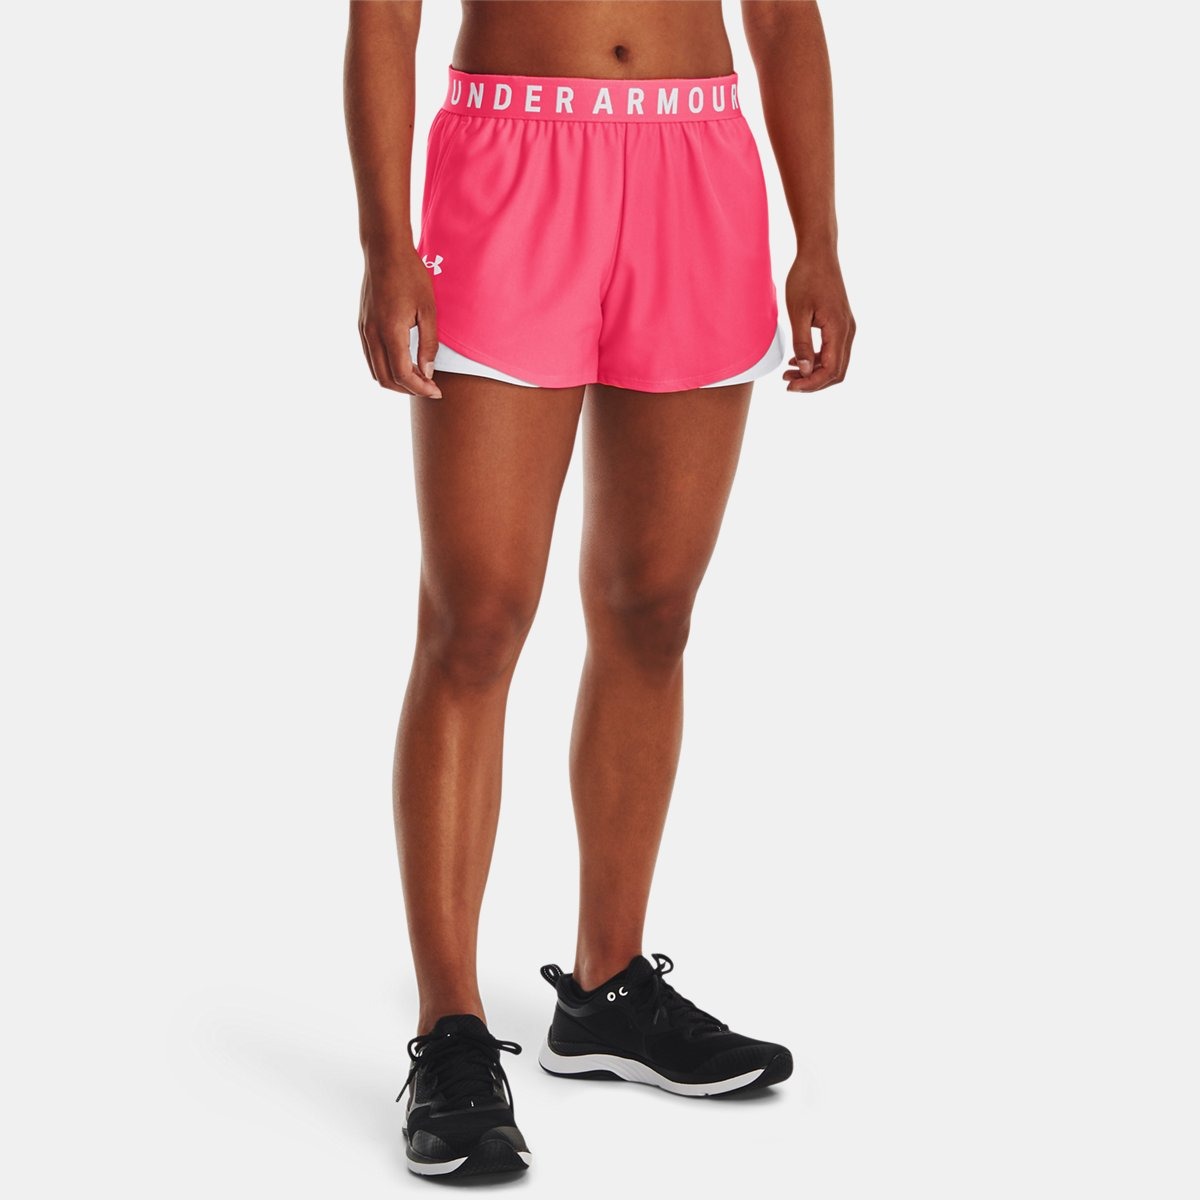 Shorts in Pink for Women at Under Armour GOOFASH